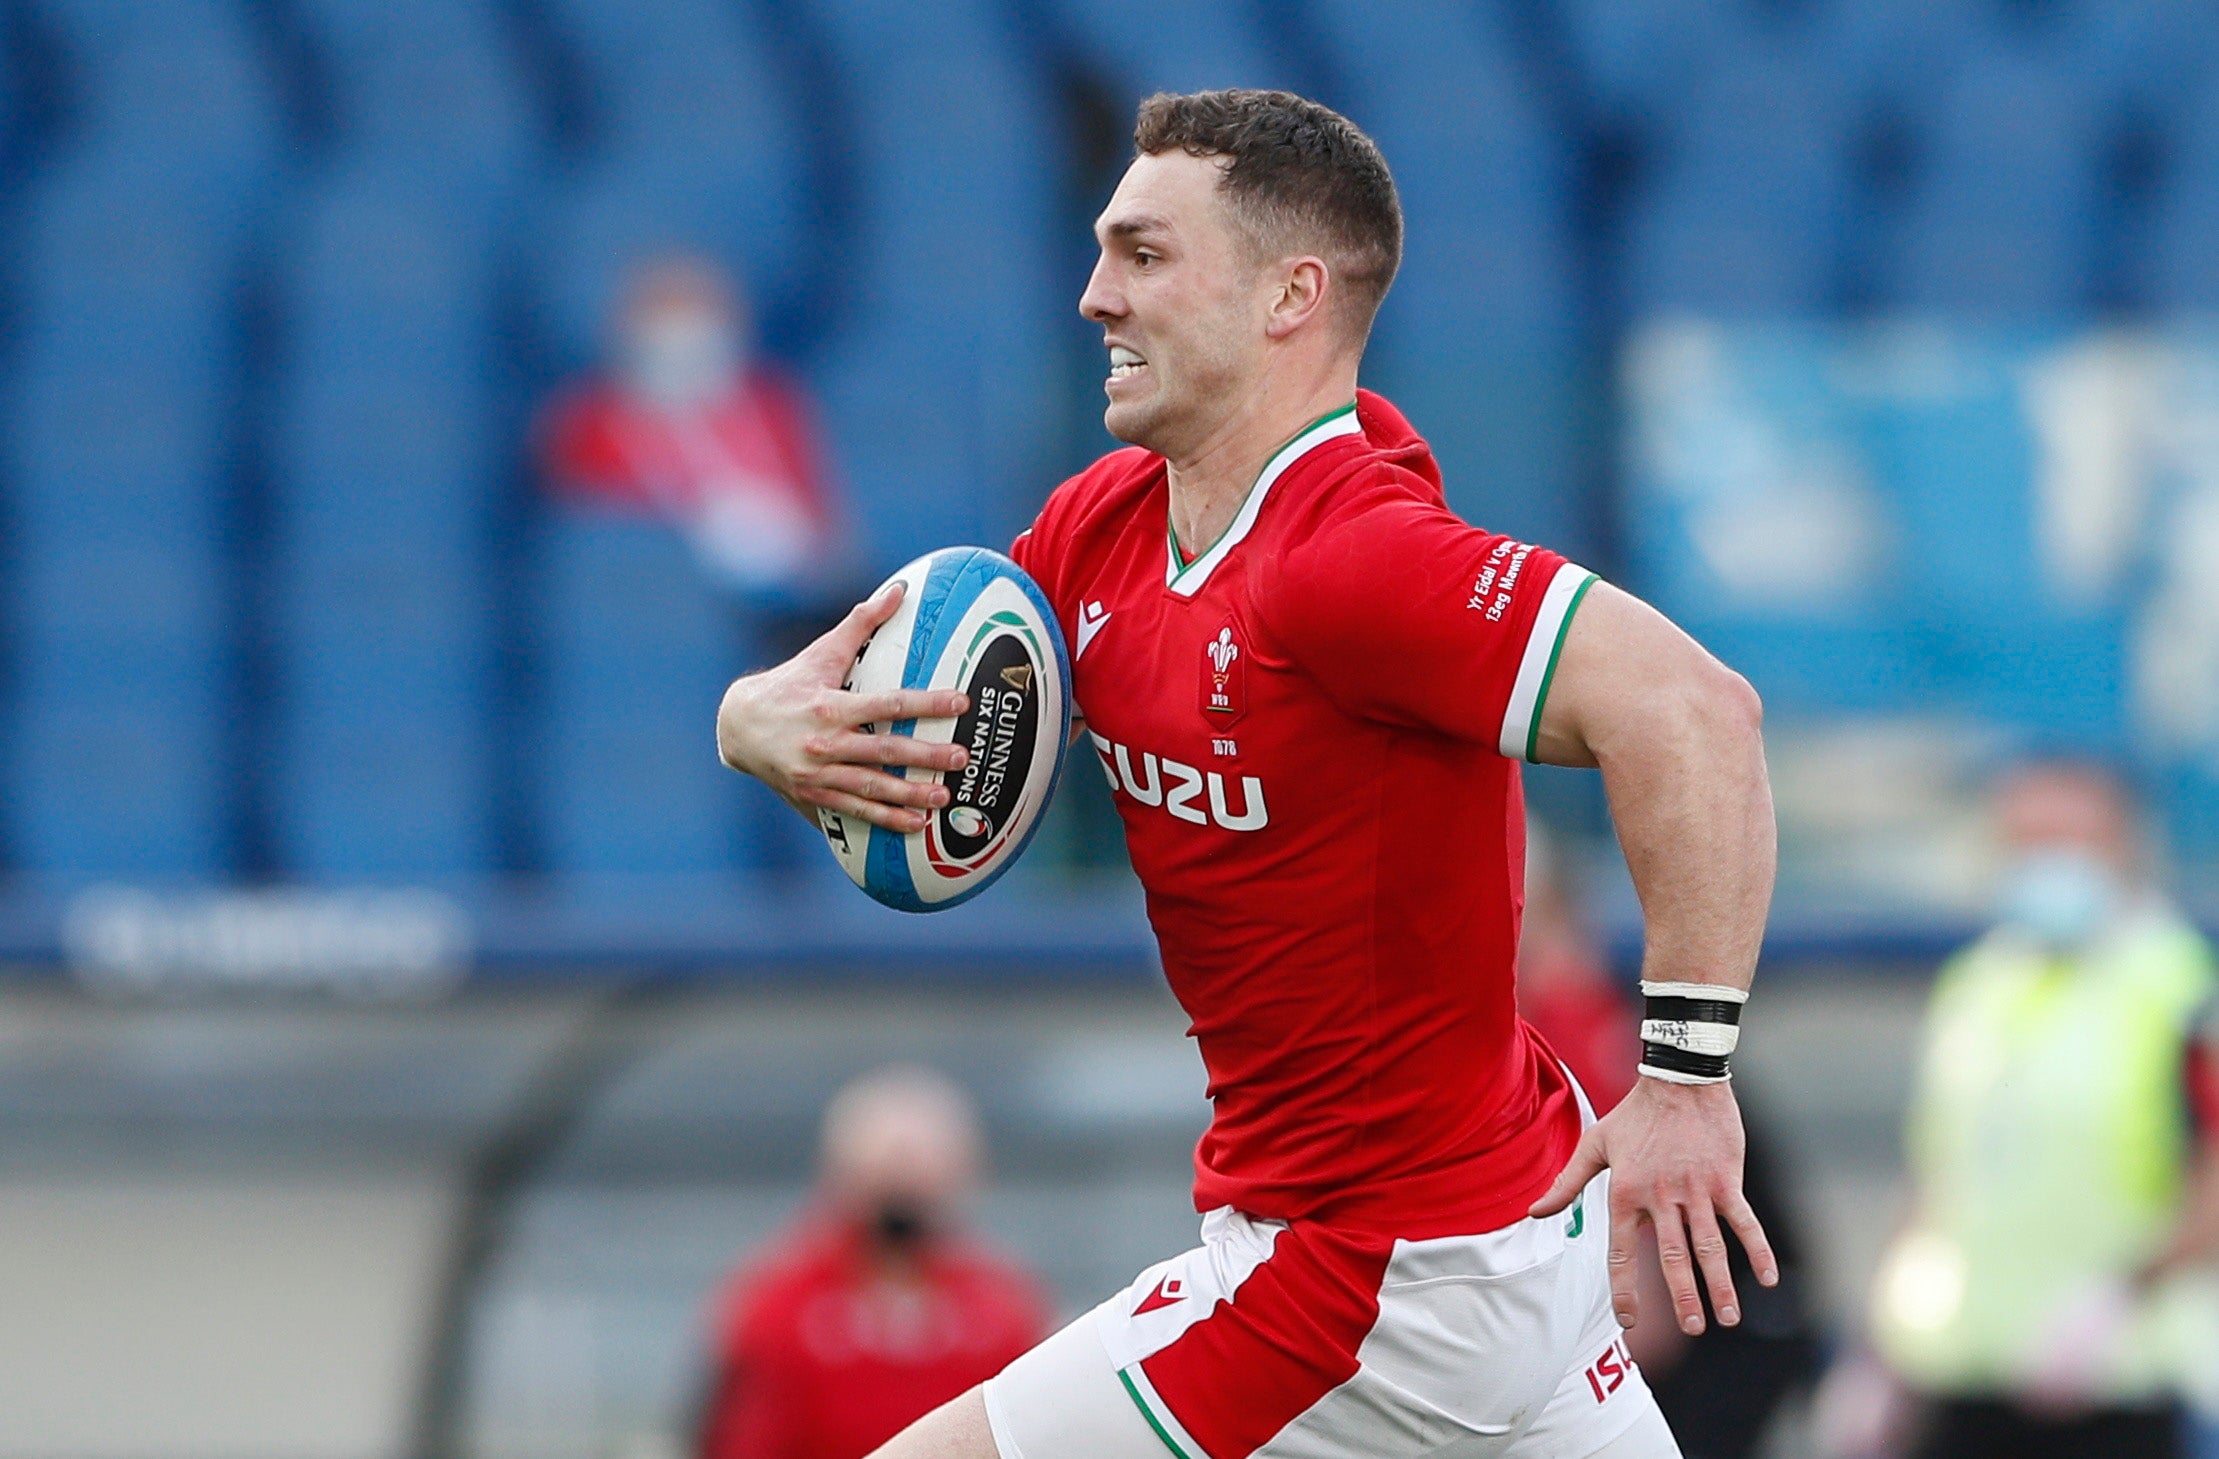 George North played a key role for Wales in the Six Nations